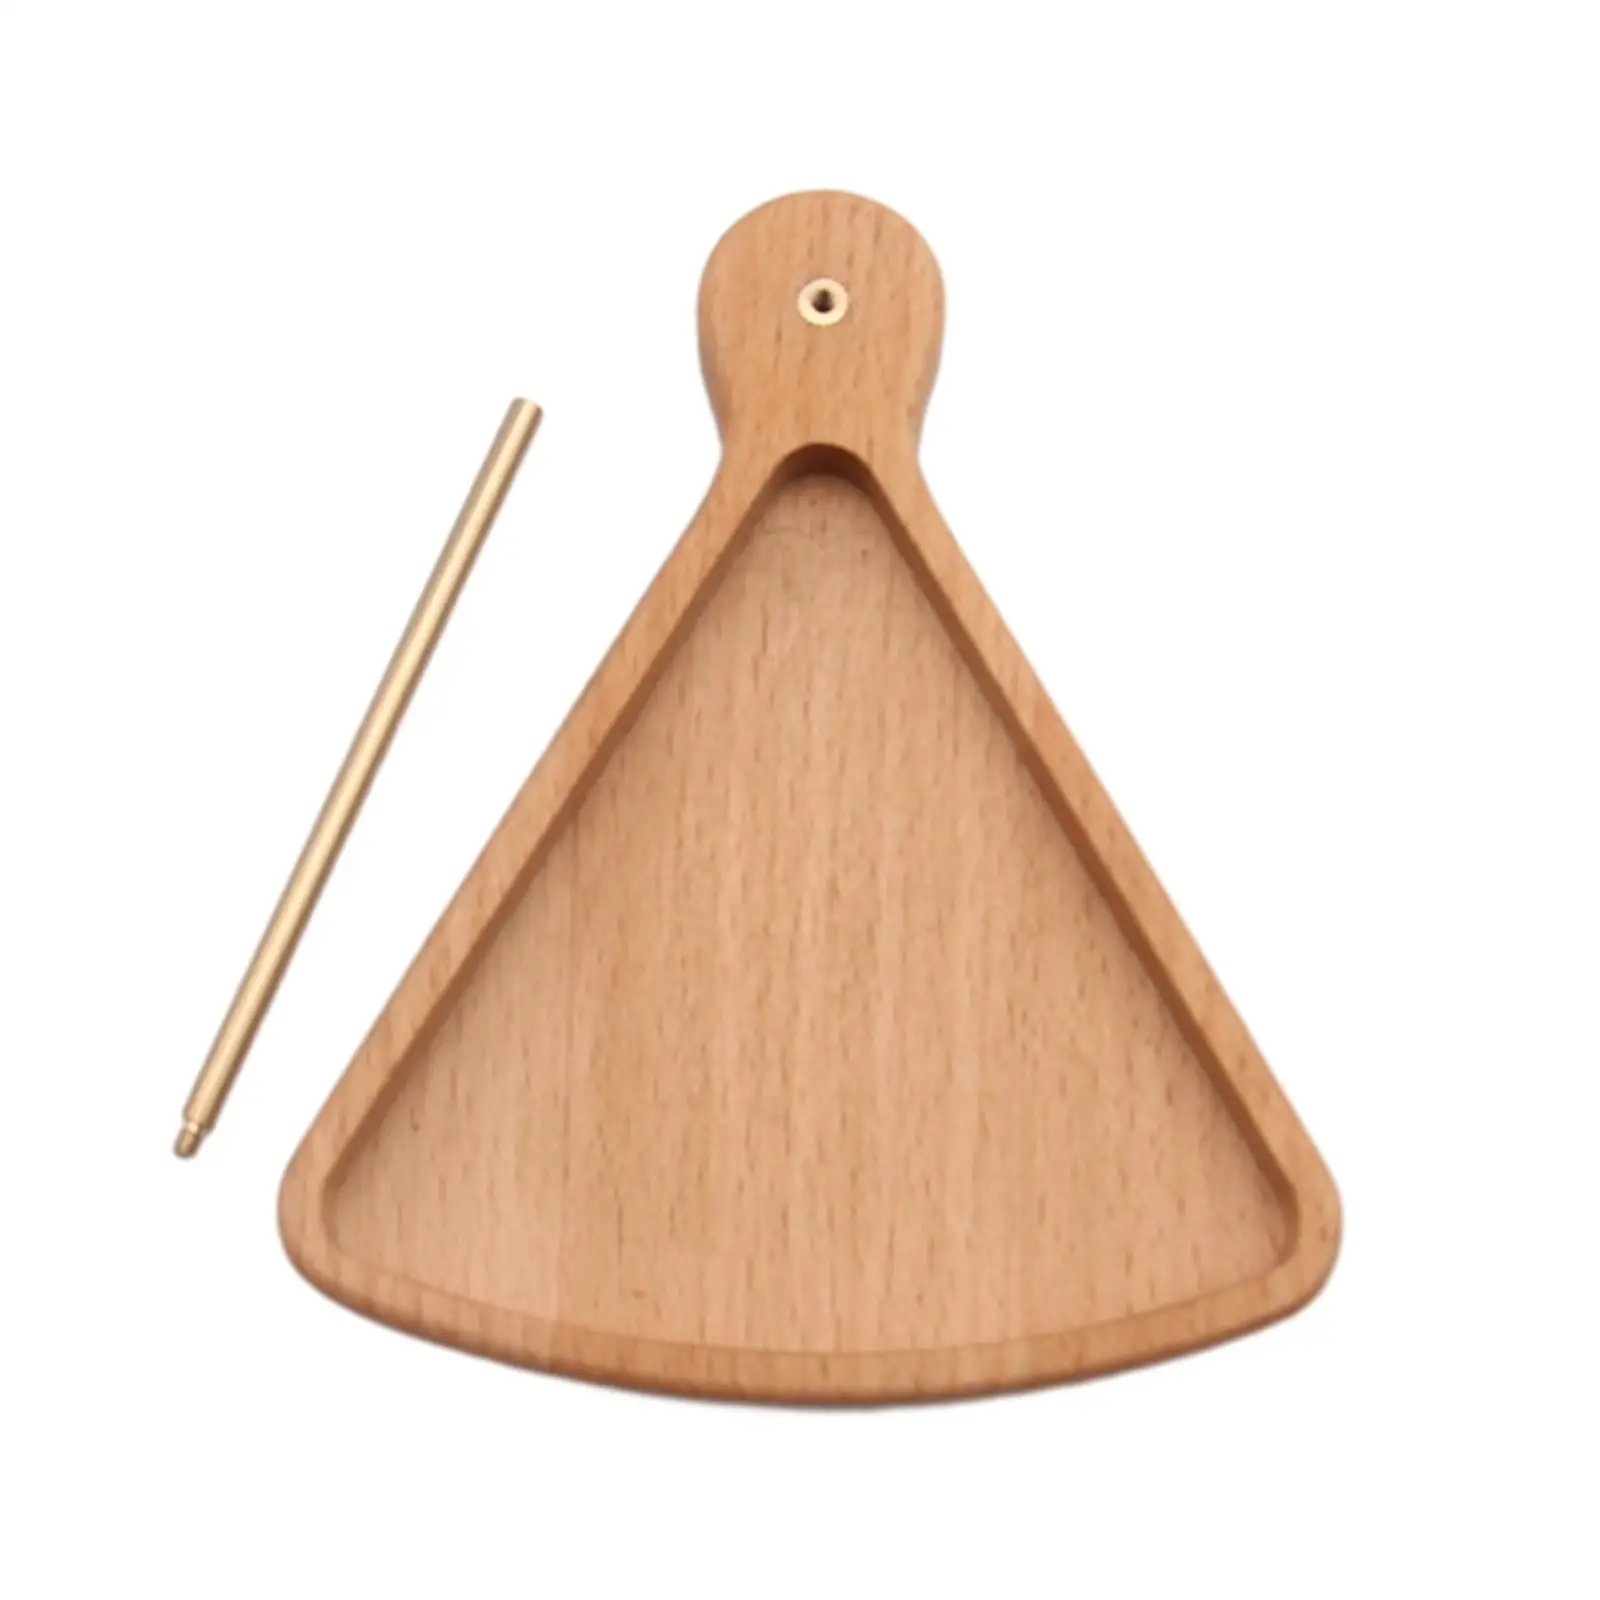 Embroidery Thread Holder Wood Gift for Crafts Lover Accessories Threading Holder for Adults Sewing Crocheting Home String Ball